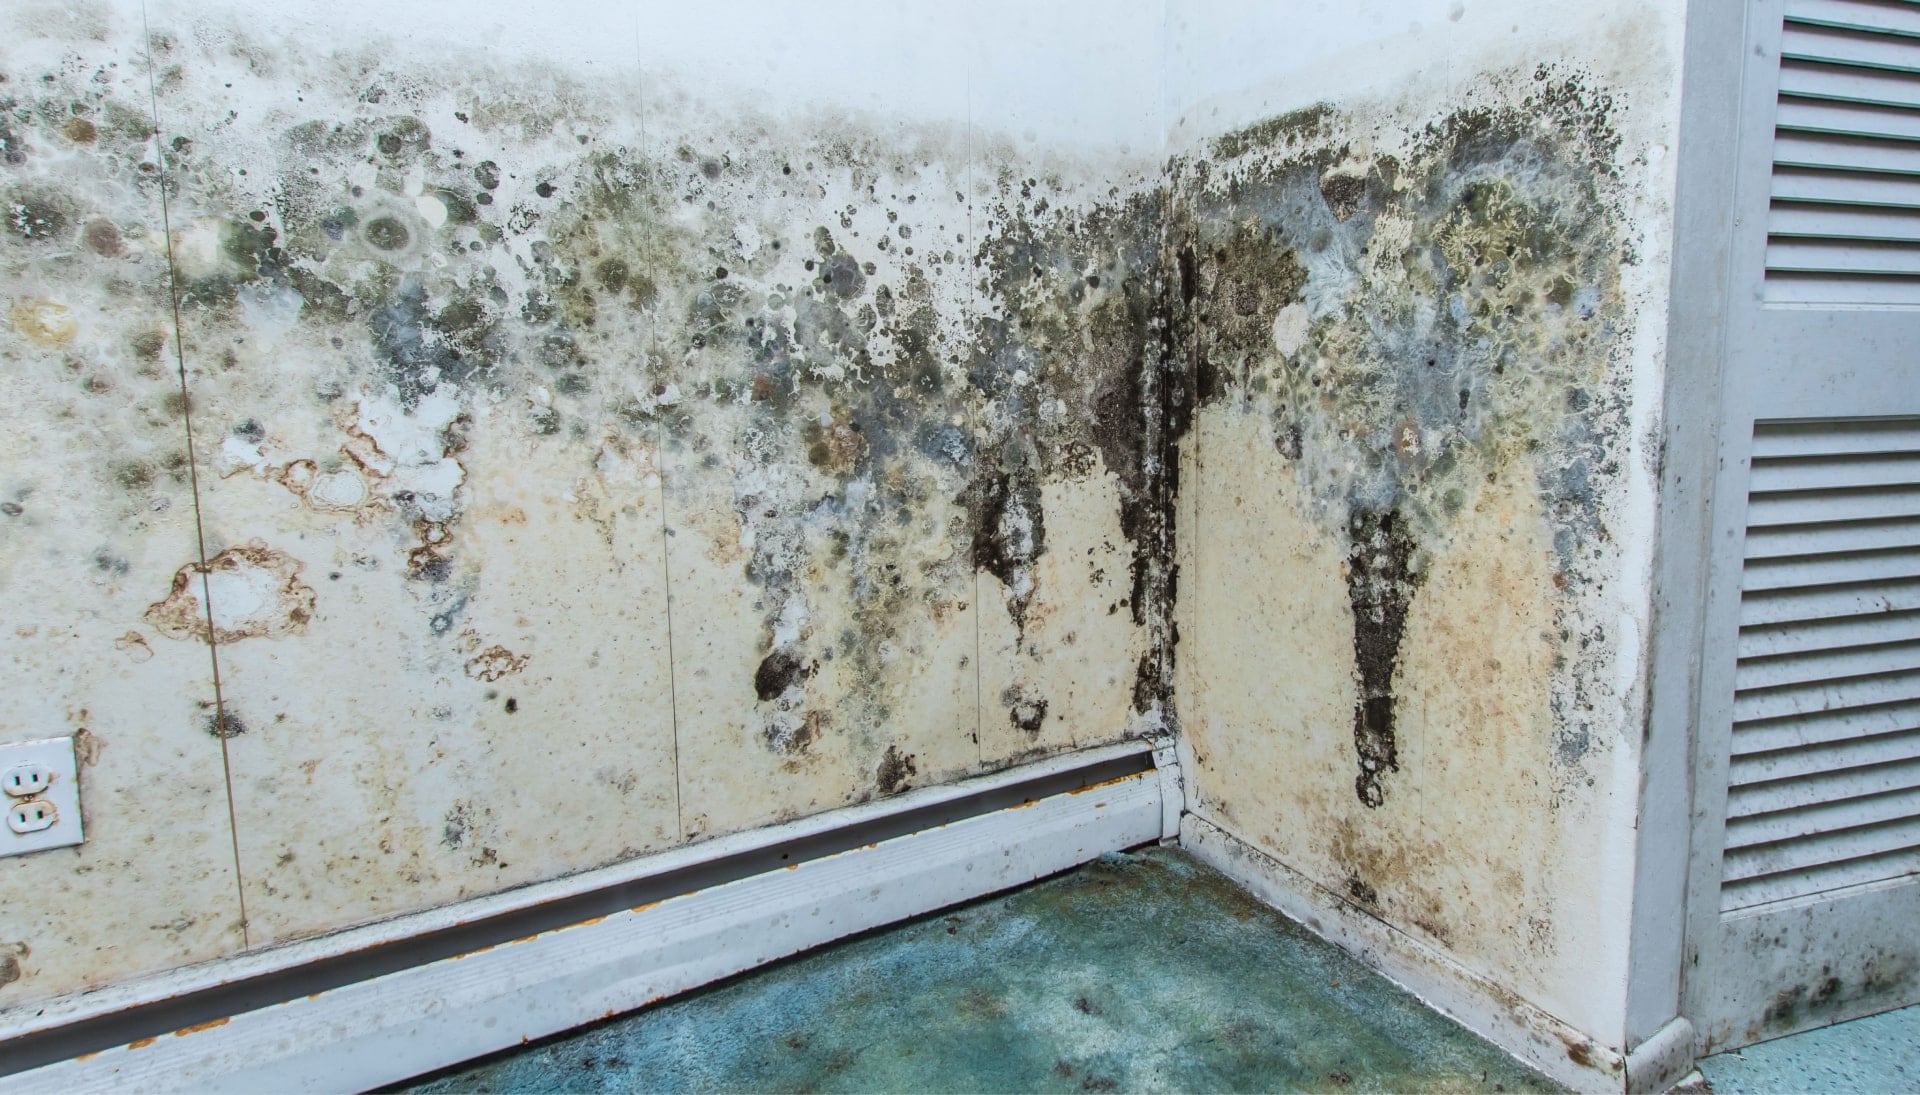 Professional mold removal, odor control, and water damage restoration service in Jacksonville, Florida.